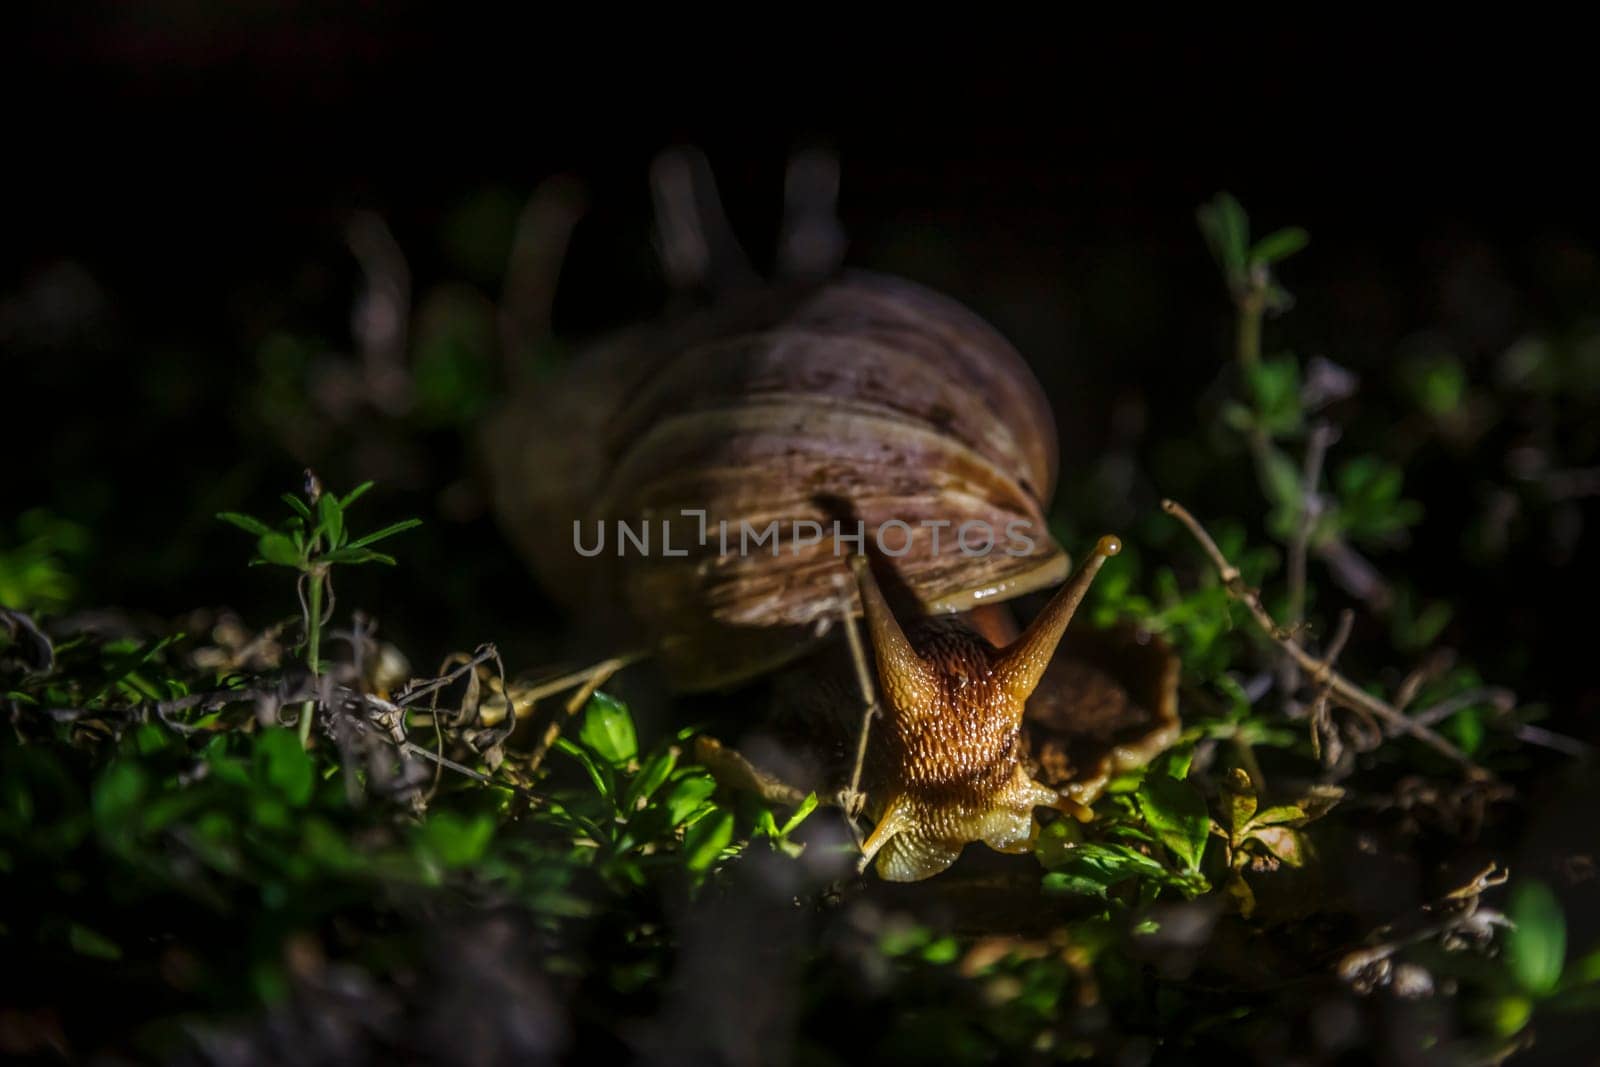 Giant African land snail moving by night front view in the grass in Kruger National park, South Africa ; Specie Lissachatina fulica family of Lissachatina fulica